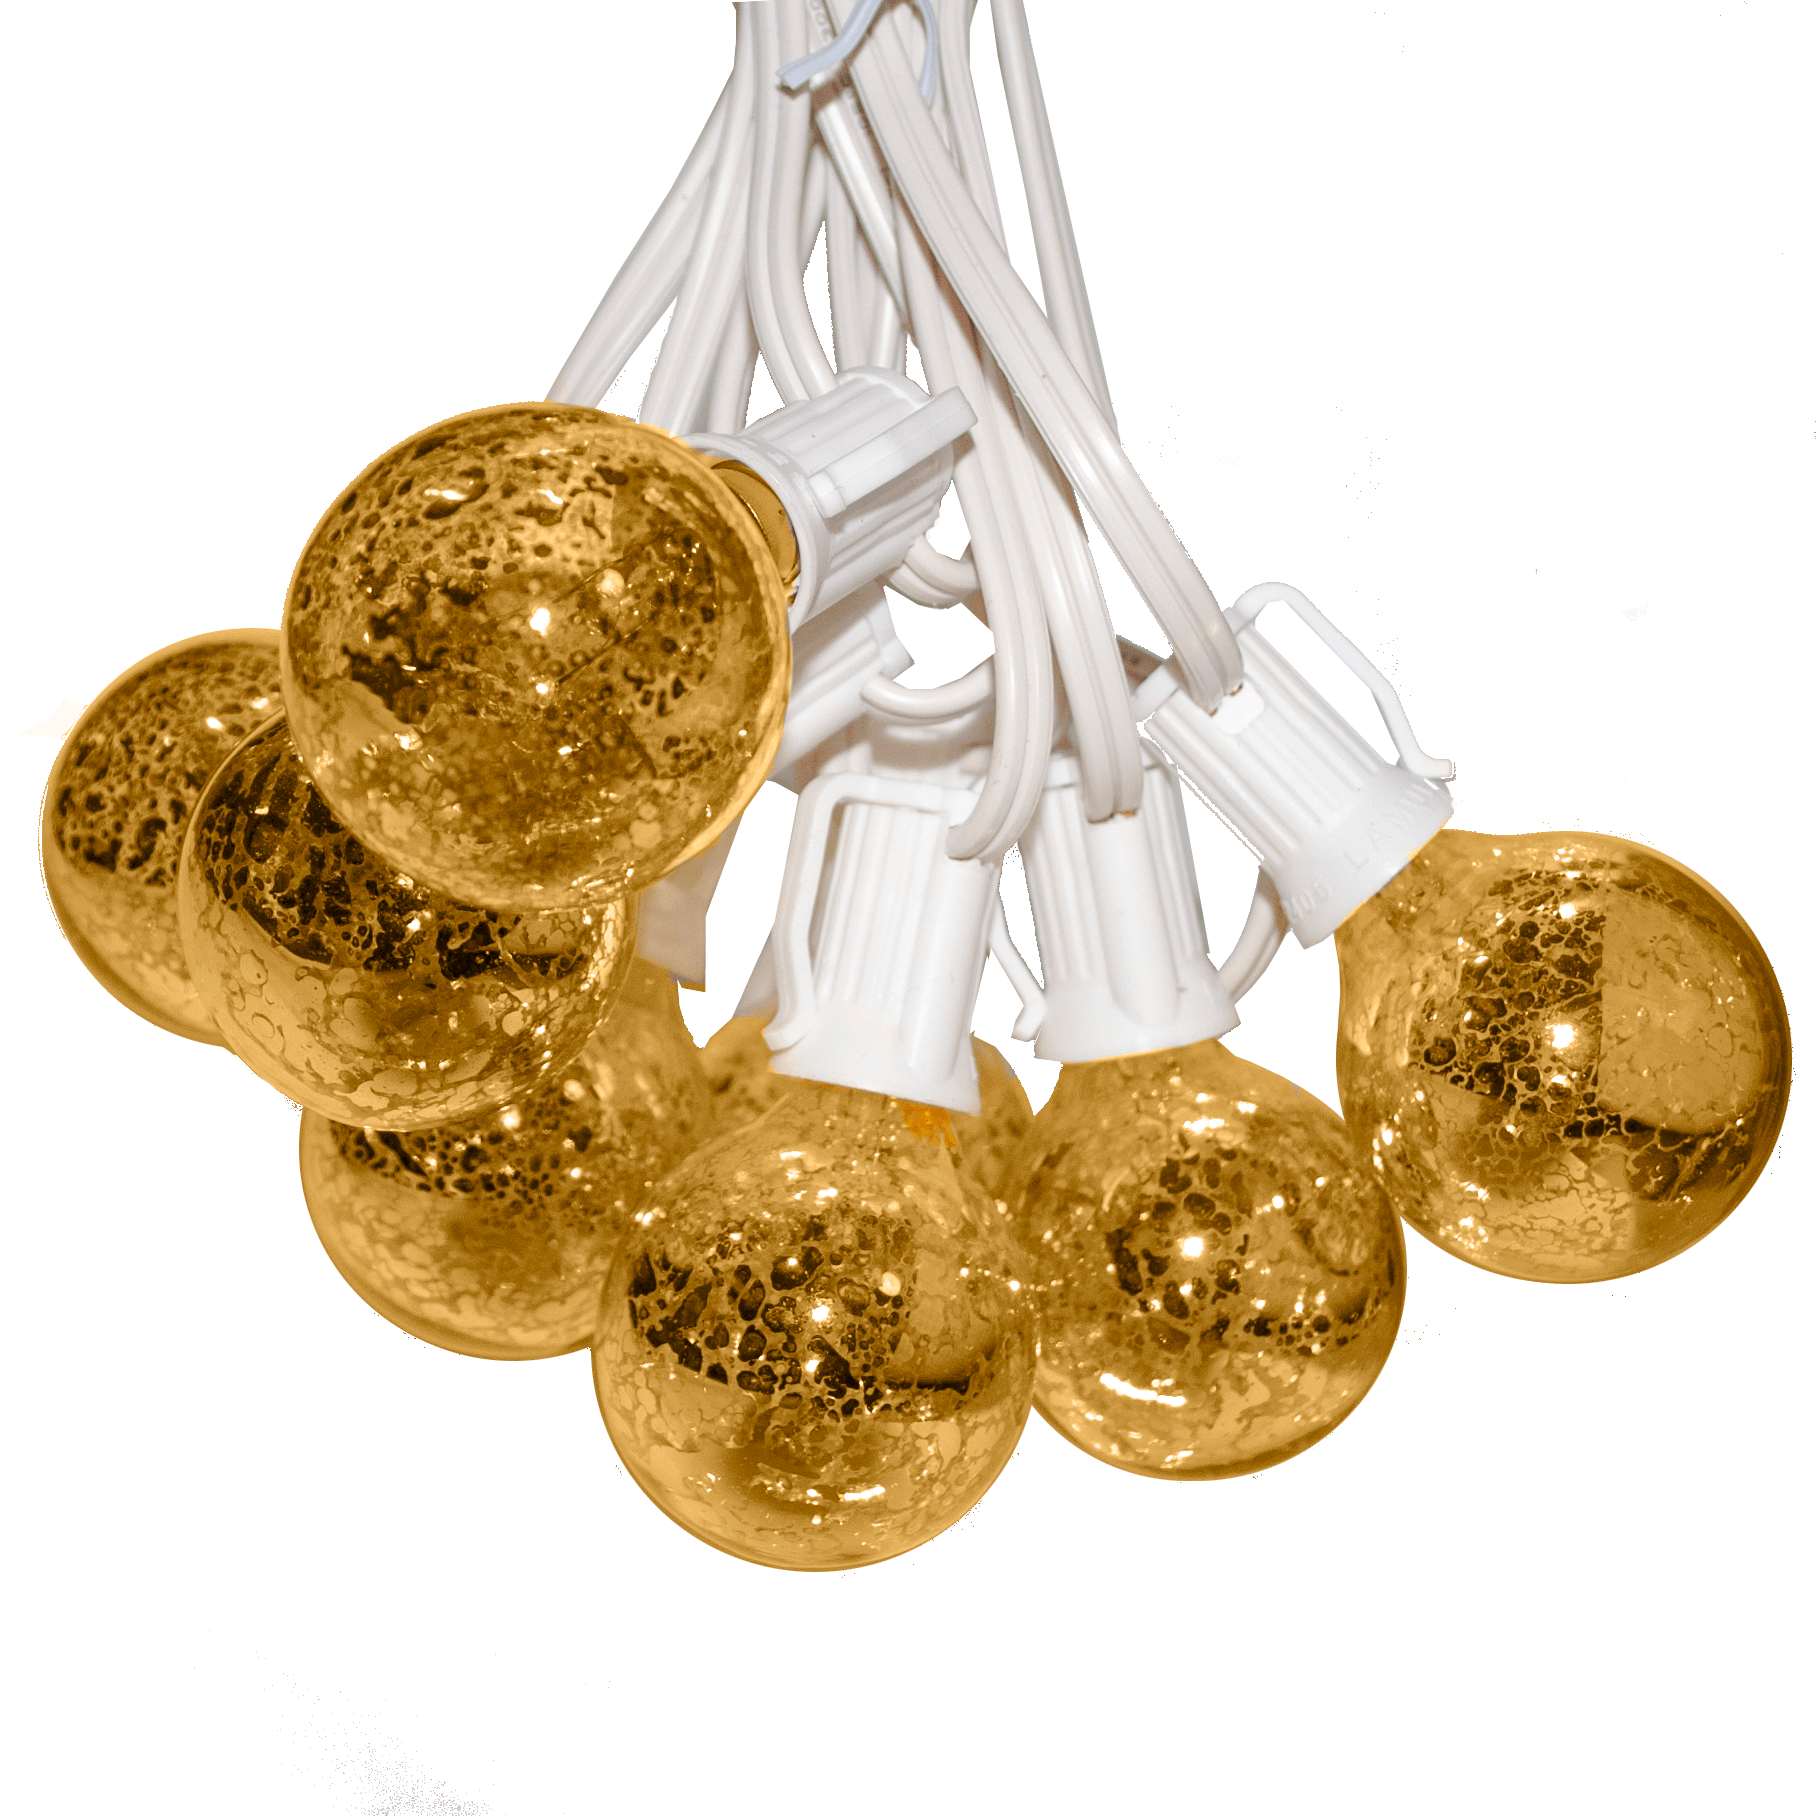 G40 Mercury Gold String Light Sets with White Wire - Hometown Evolution Inc.